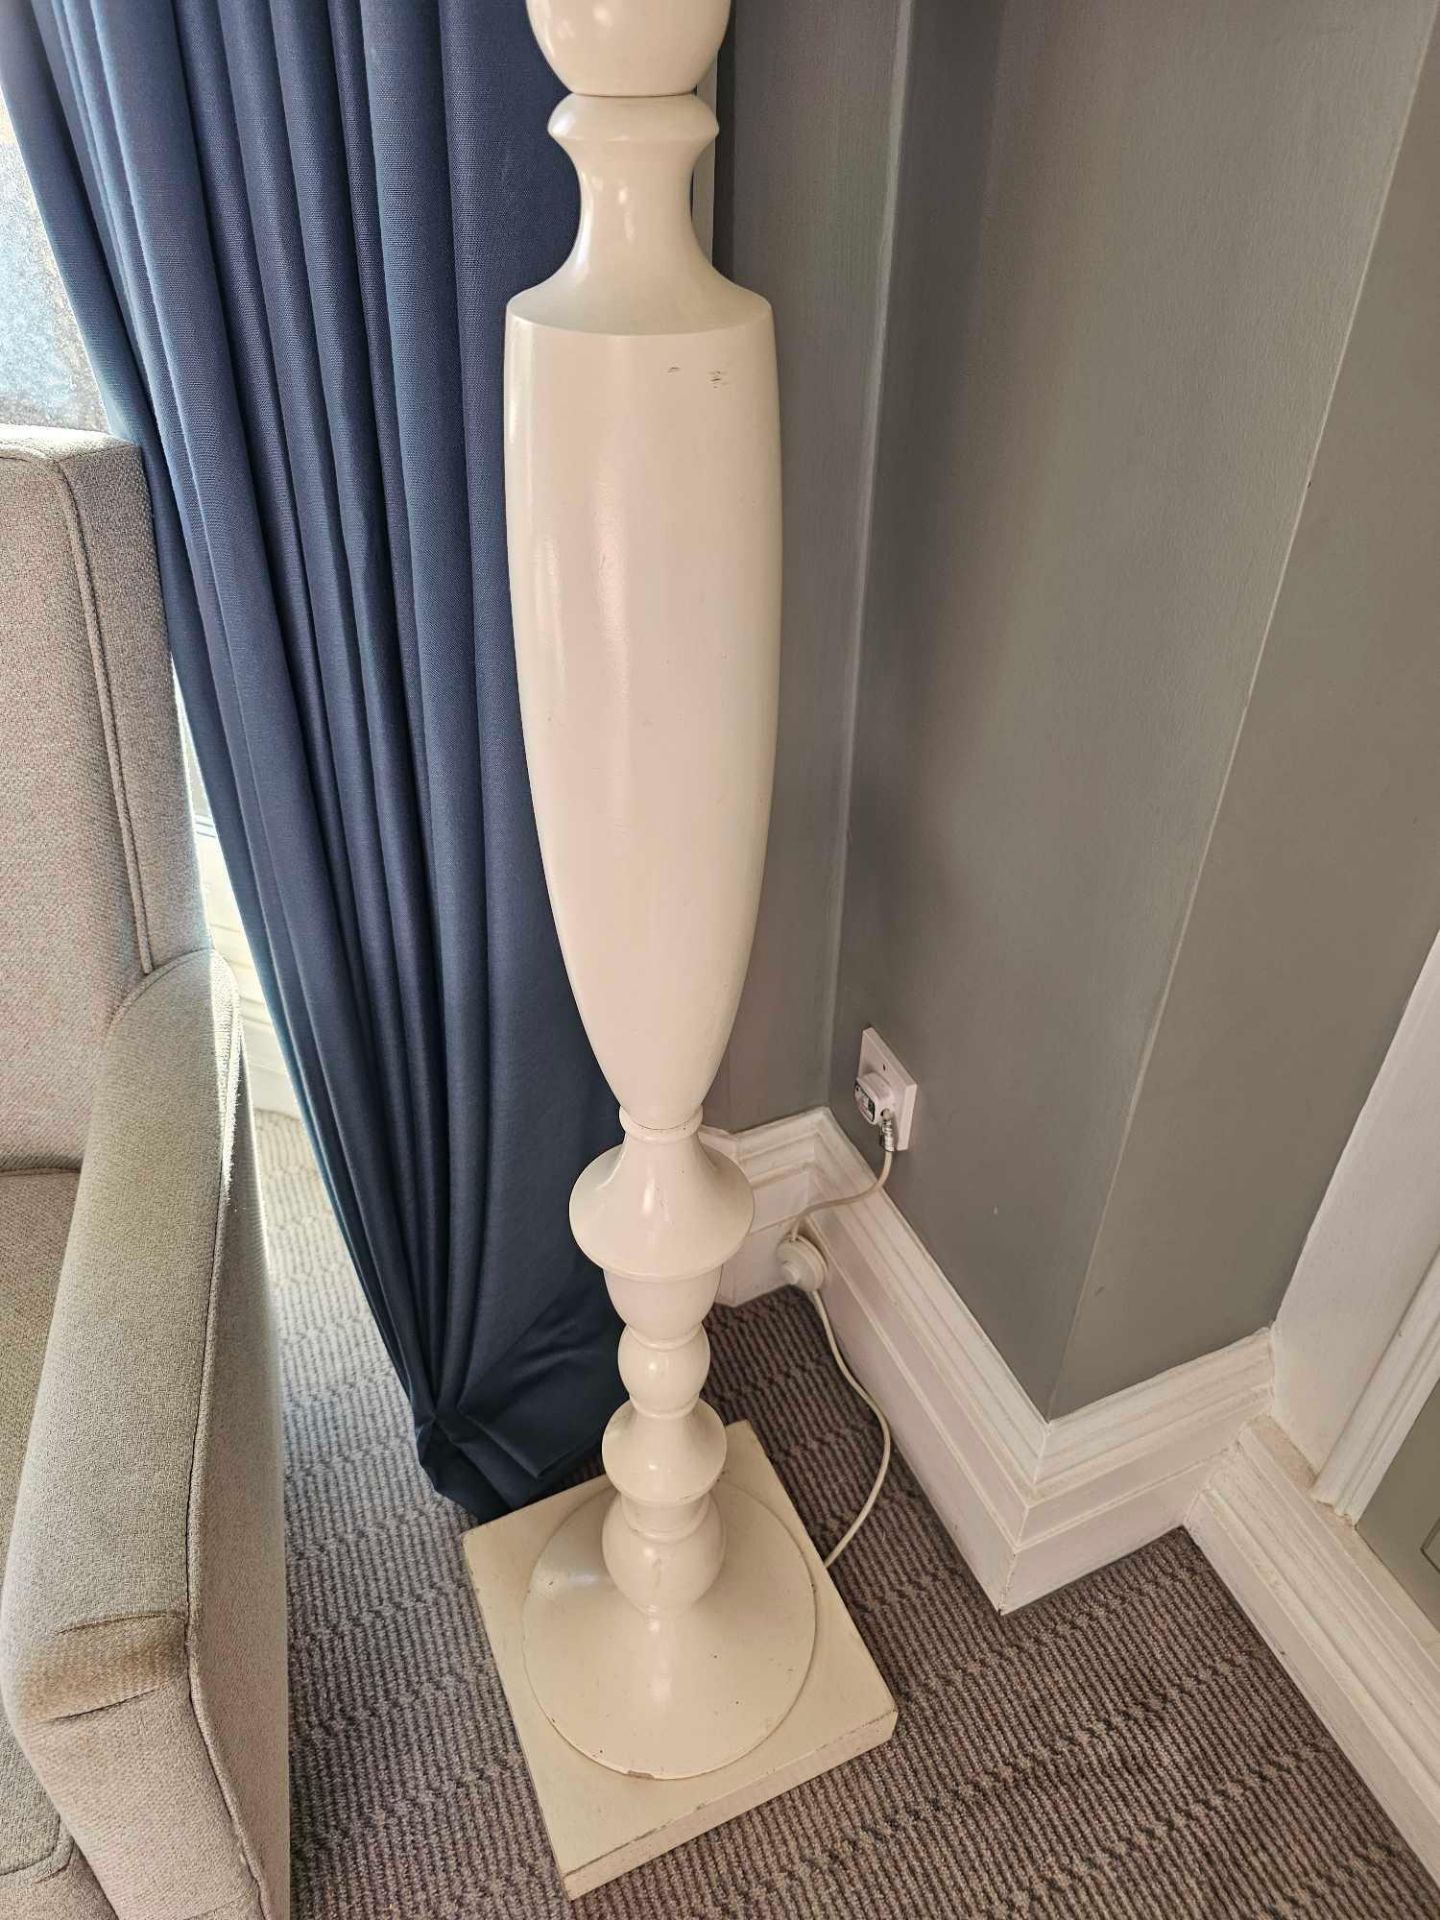 Heathfield & Co Oscar Carved Wood Floor Standard Lamp Gardenia White Painted Finish Complete With - Image 2 of 3